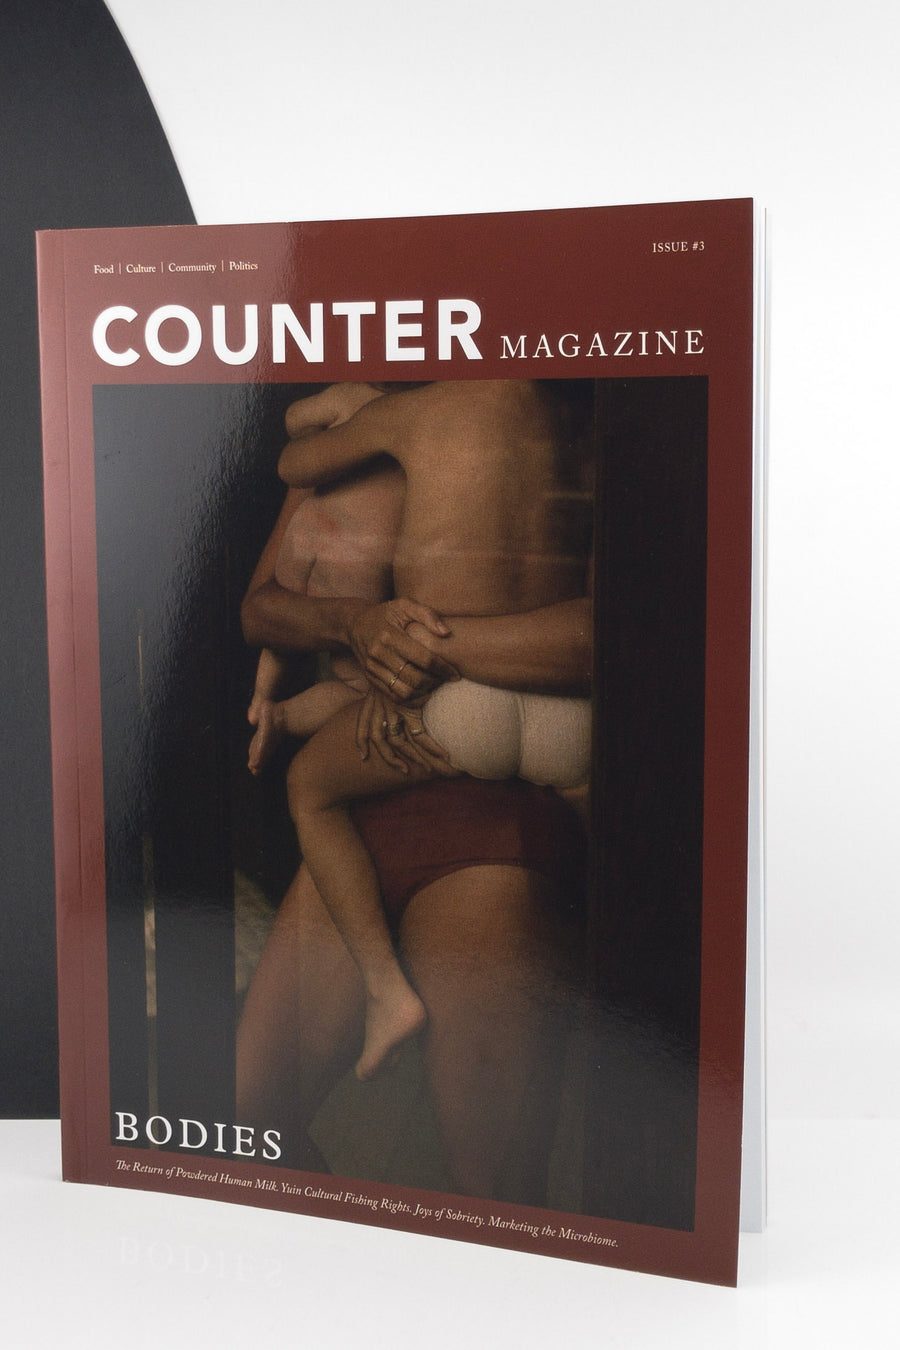 Counter Magazine Issues #3 Bodies